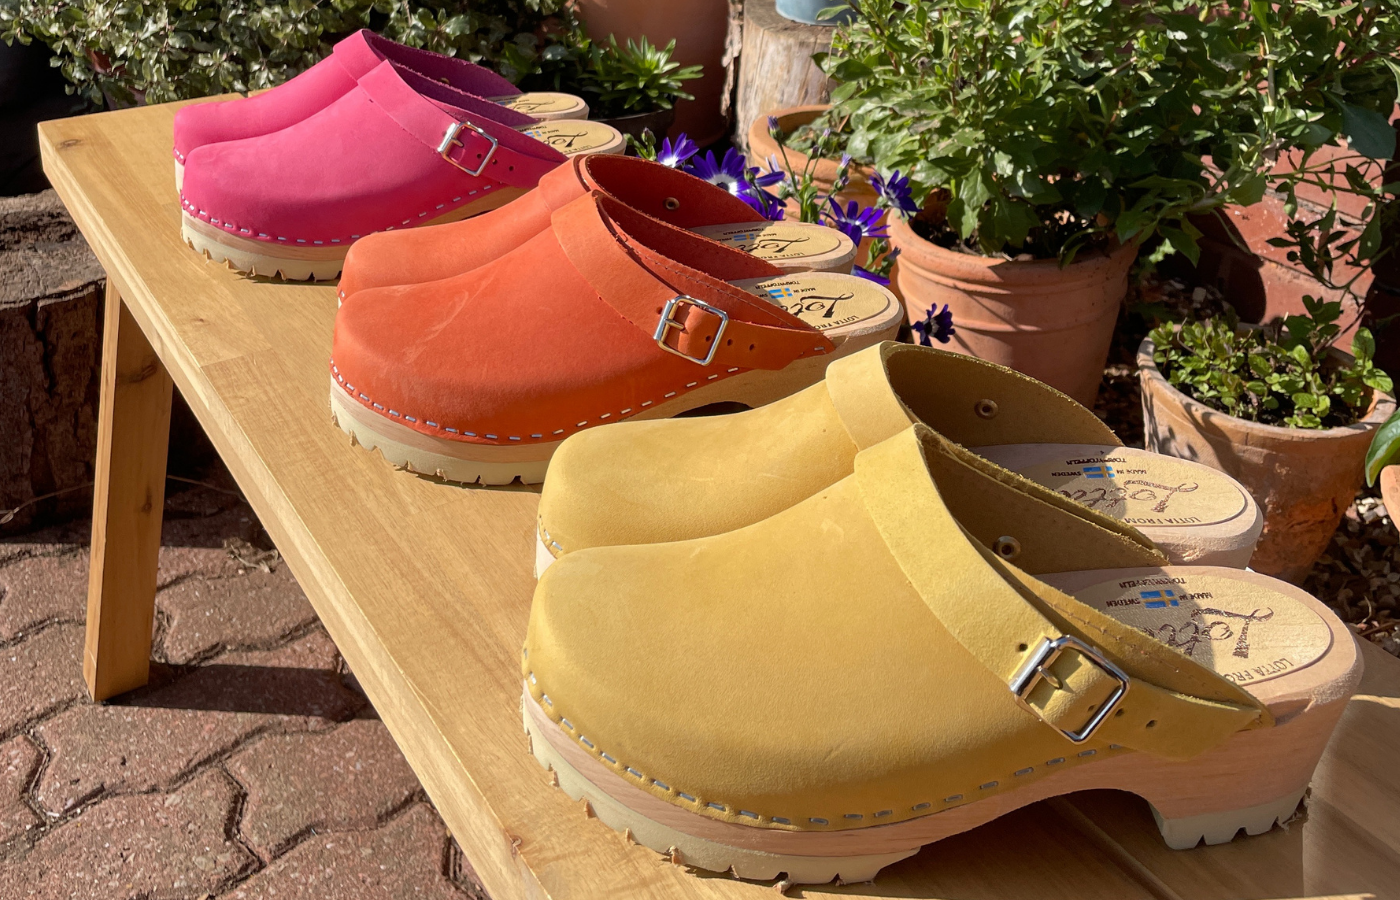 colourful clogs for spring, pink, orange and yellow classic clogs with a tractor sole